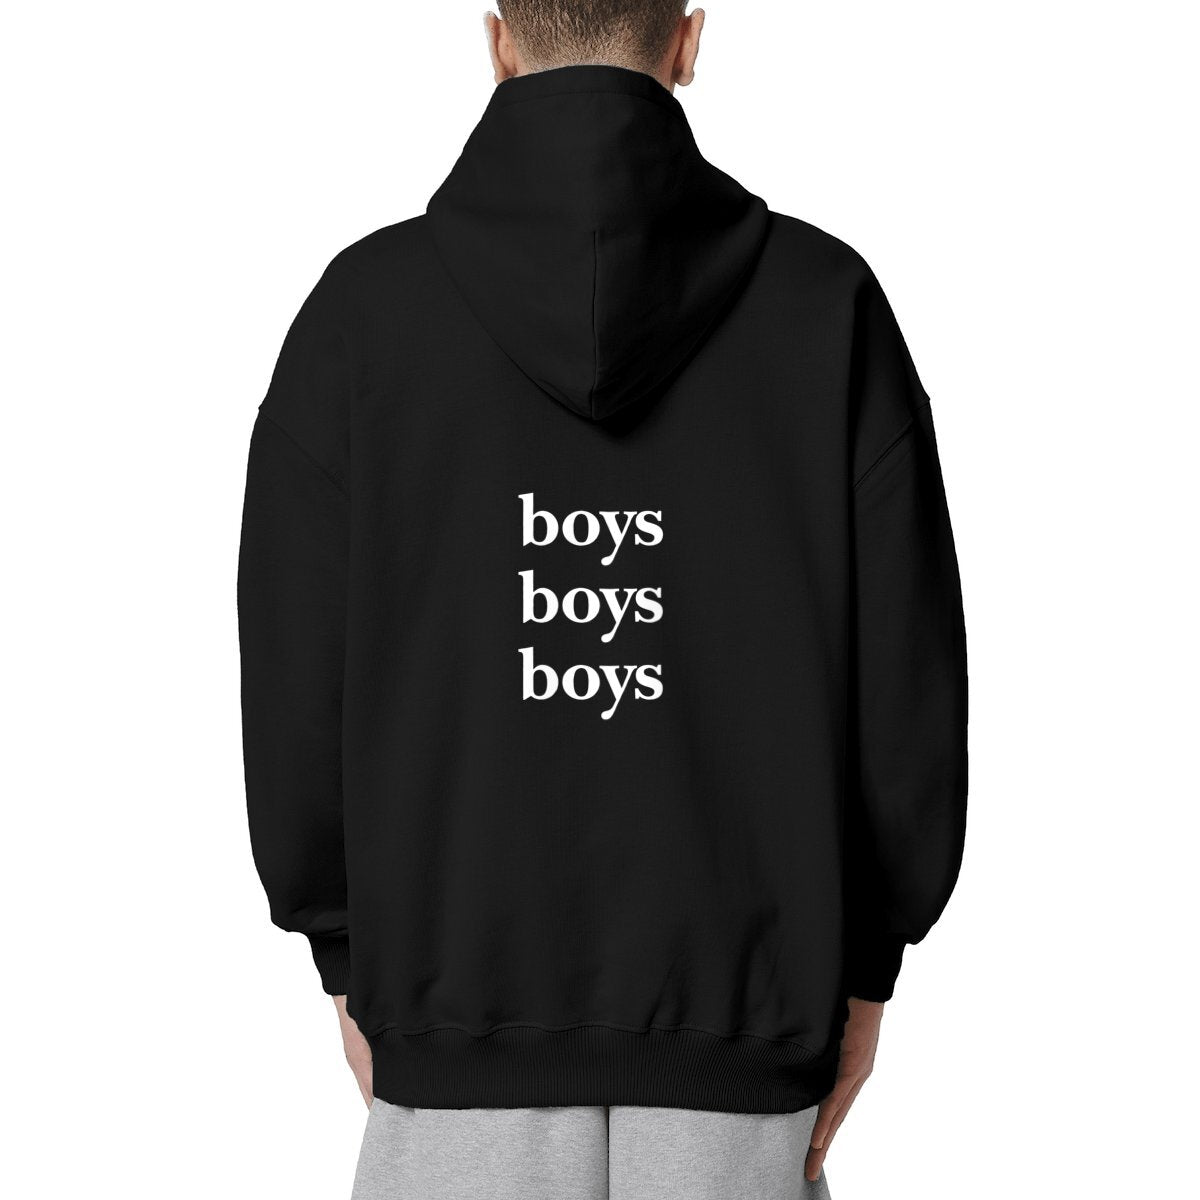 BOYS BOYS BOYS hoodie oversized. garçon garçon essentiel oversized hoodie. Sleek in black and whispering Parisian chic, this hoodie is the sartorial whisper of 'garçon garçon' — a statement of understated elegance. Perfect for those who carry a piece of Paris in their hearts and a touch of audacity on their sleeves.